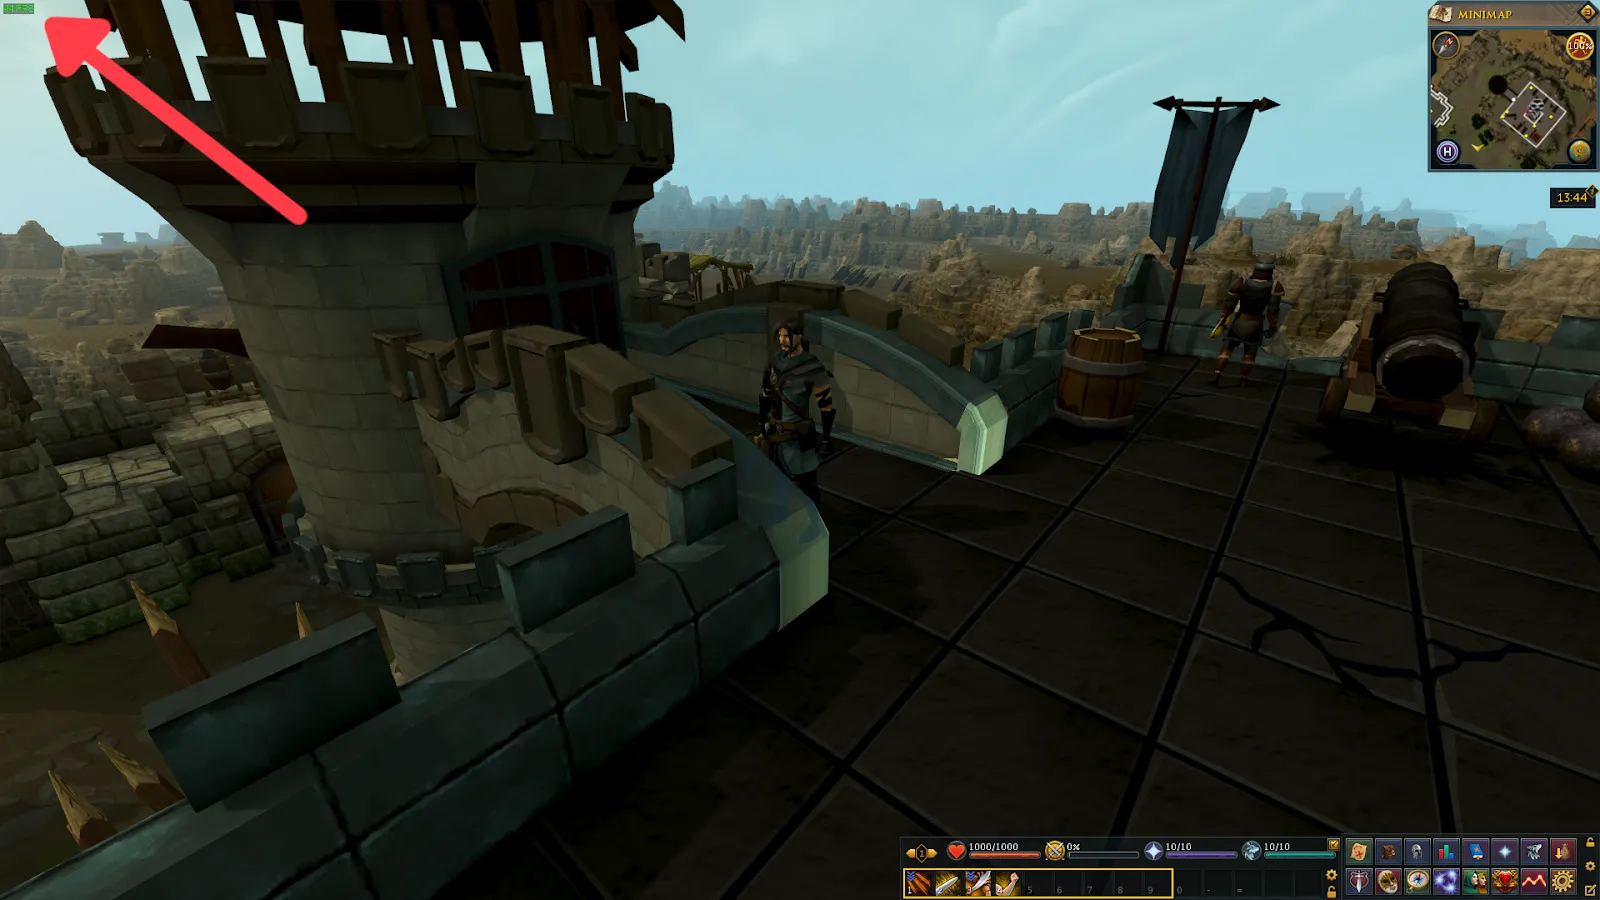 Steam show FPS in Runescape demonstration image